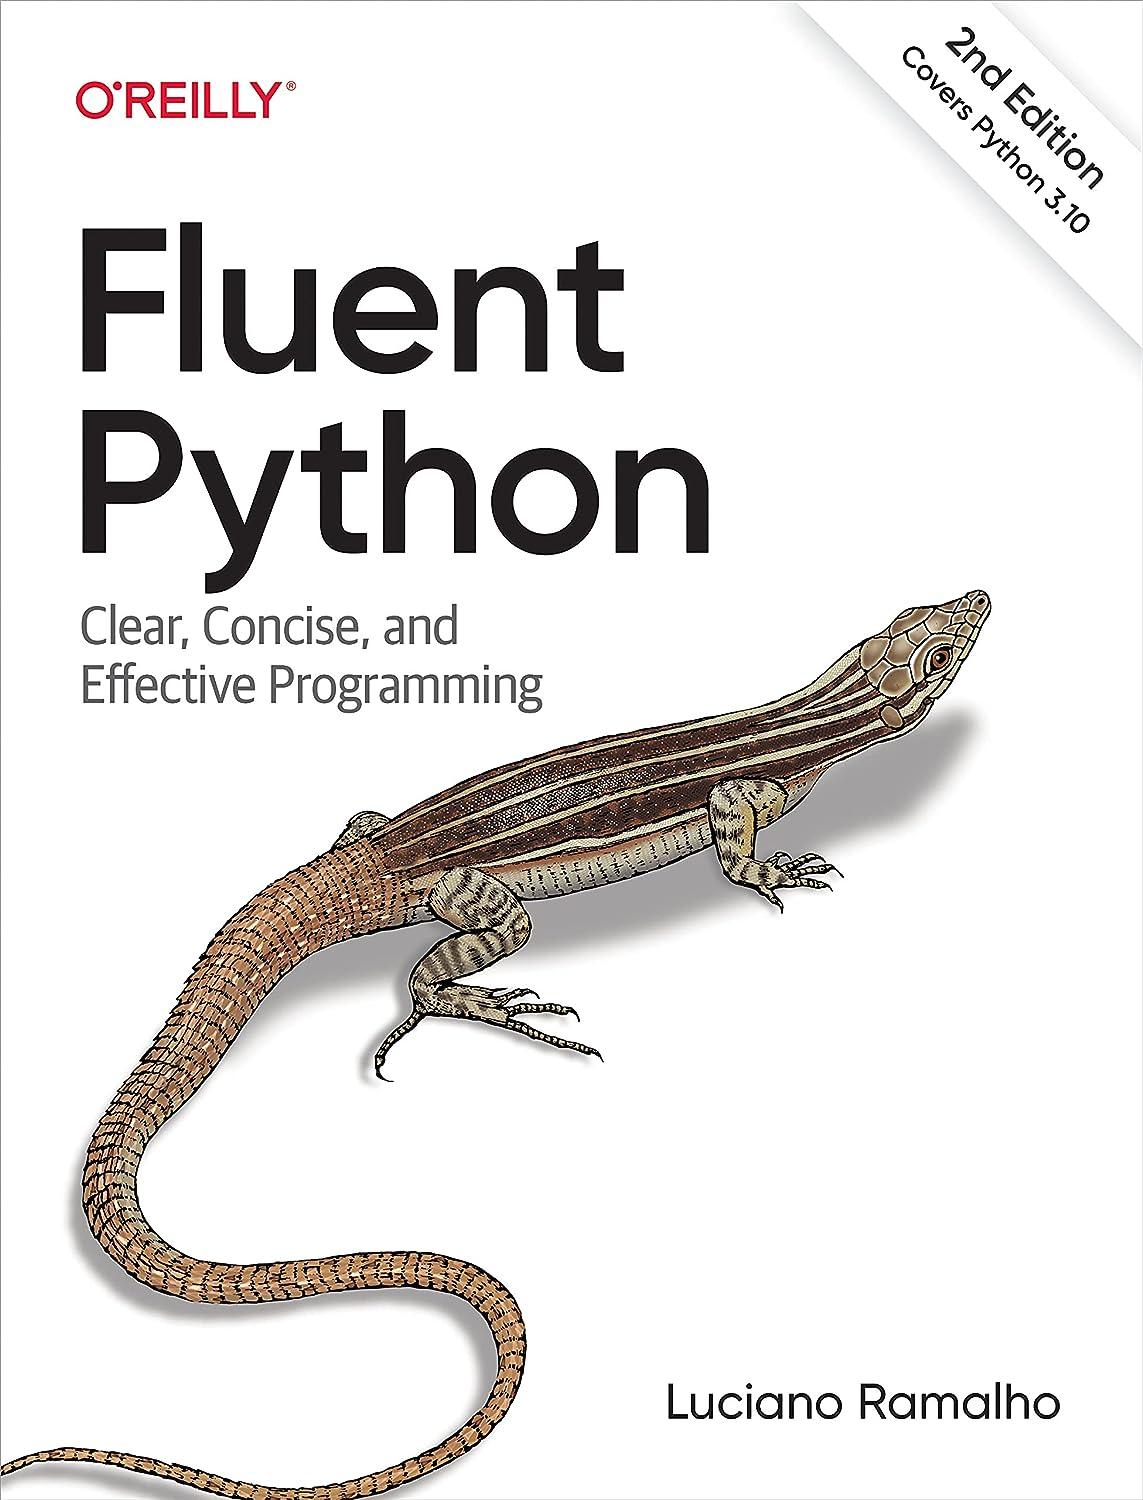 fluent python clear concise and effective programming 2nd edition luciano ramalho 1492056359, 978-1492056355